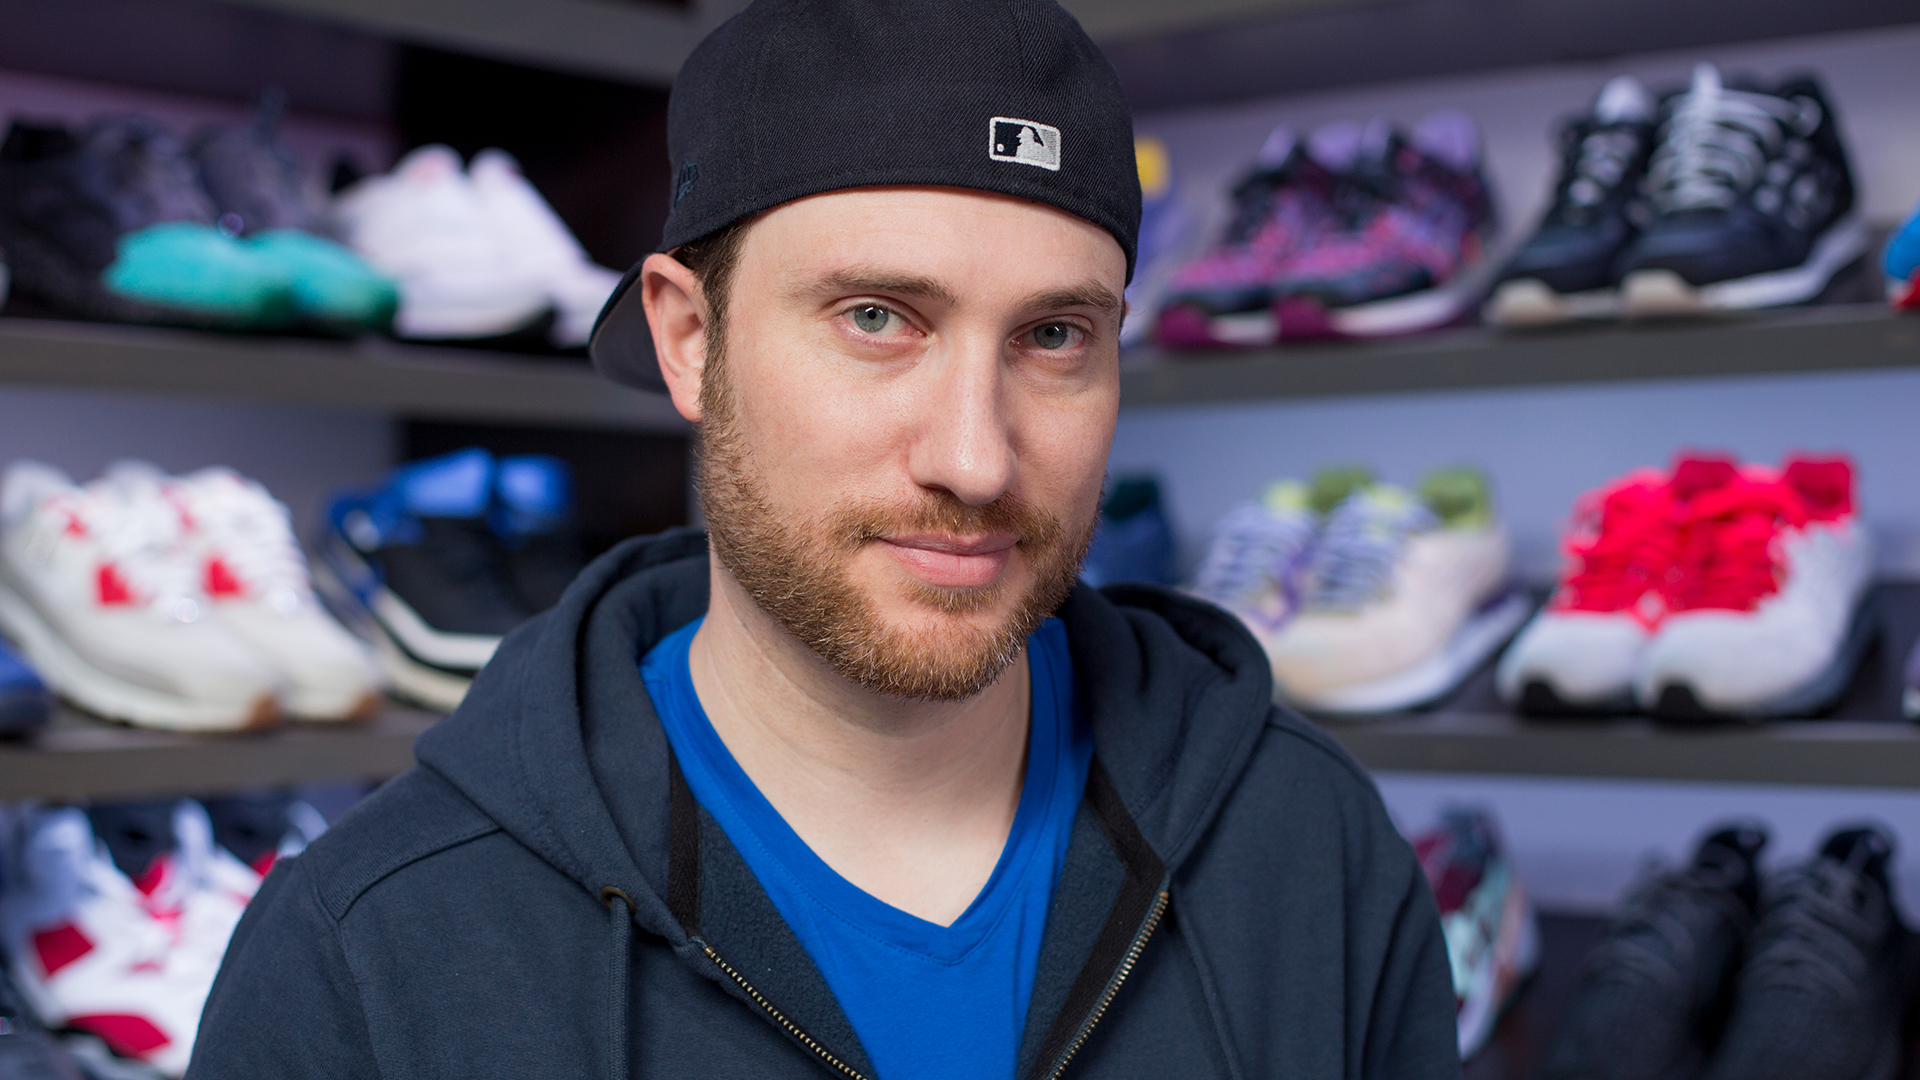 Decipher sneaker culture with the 